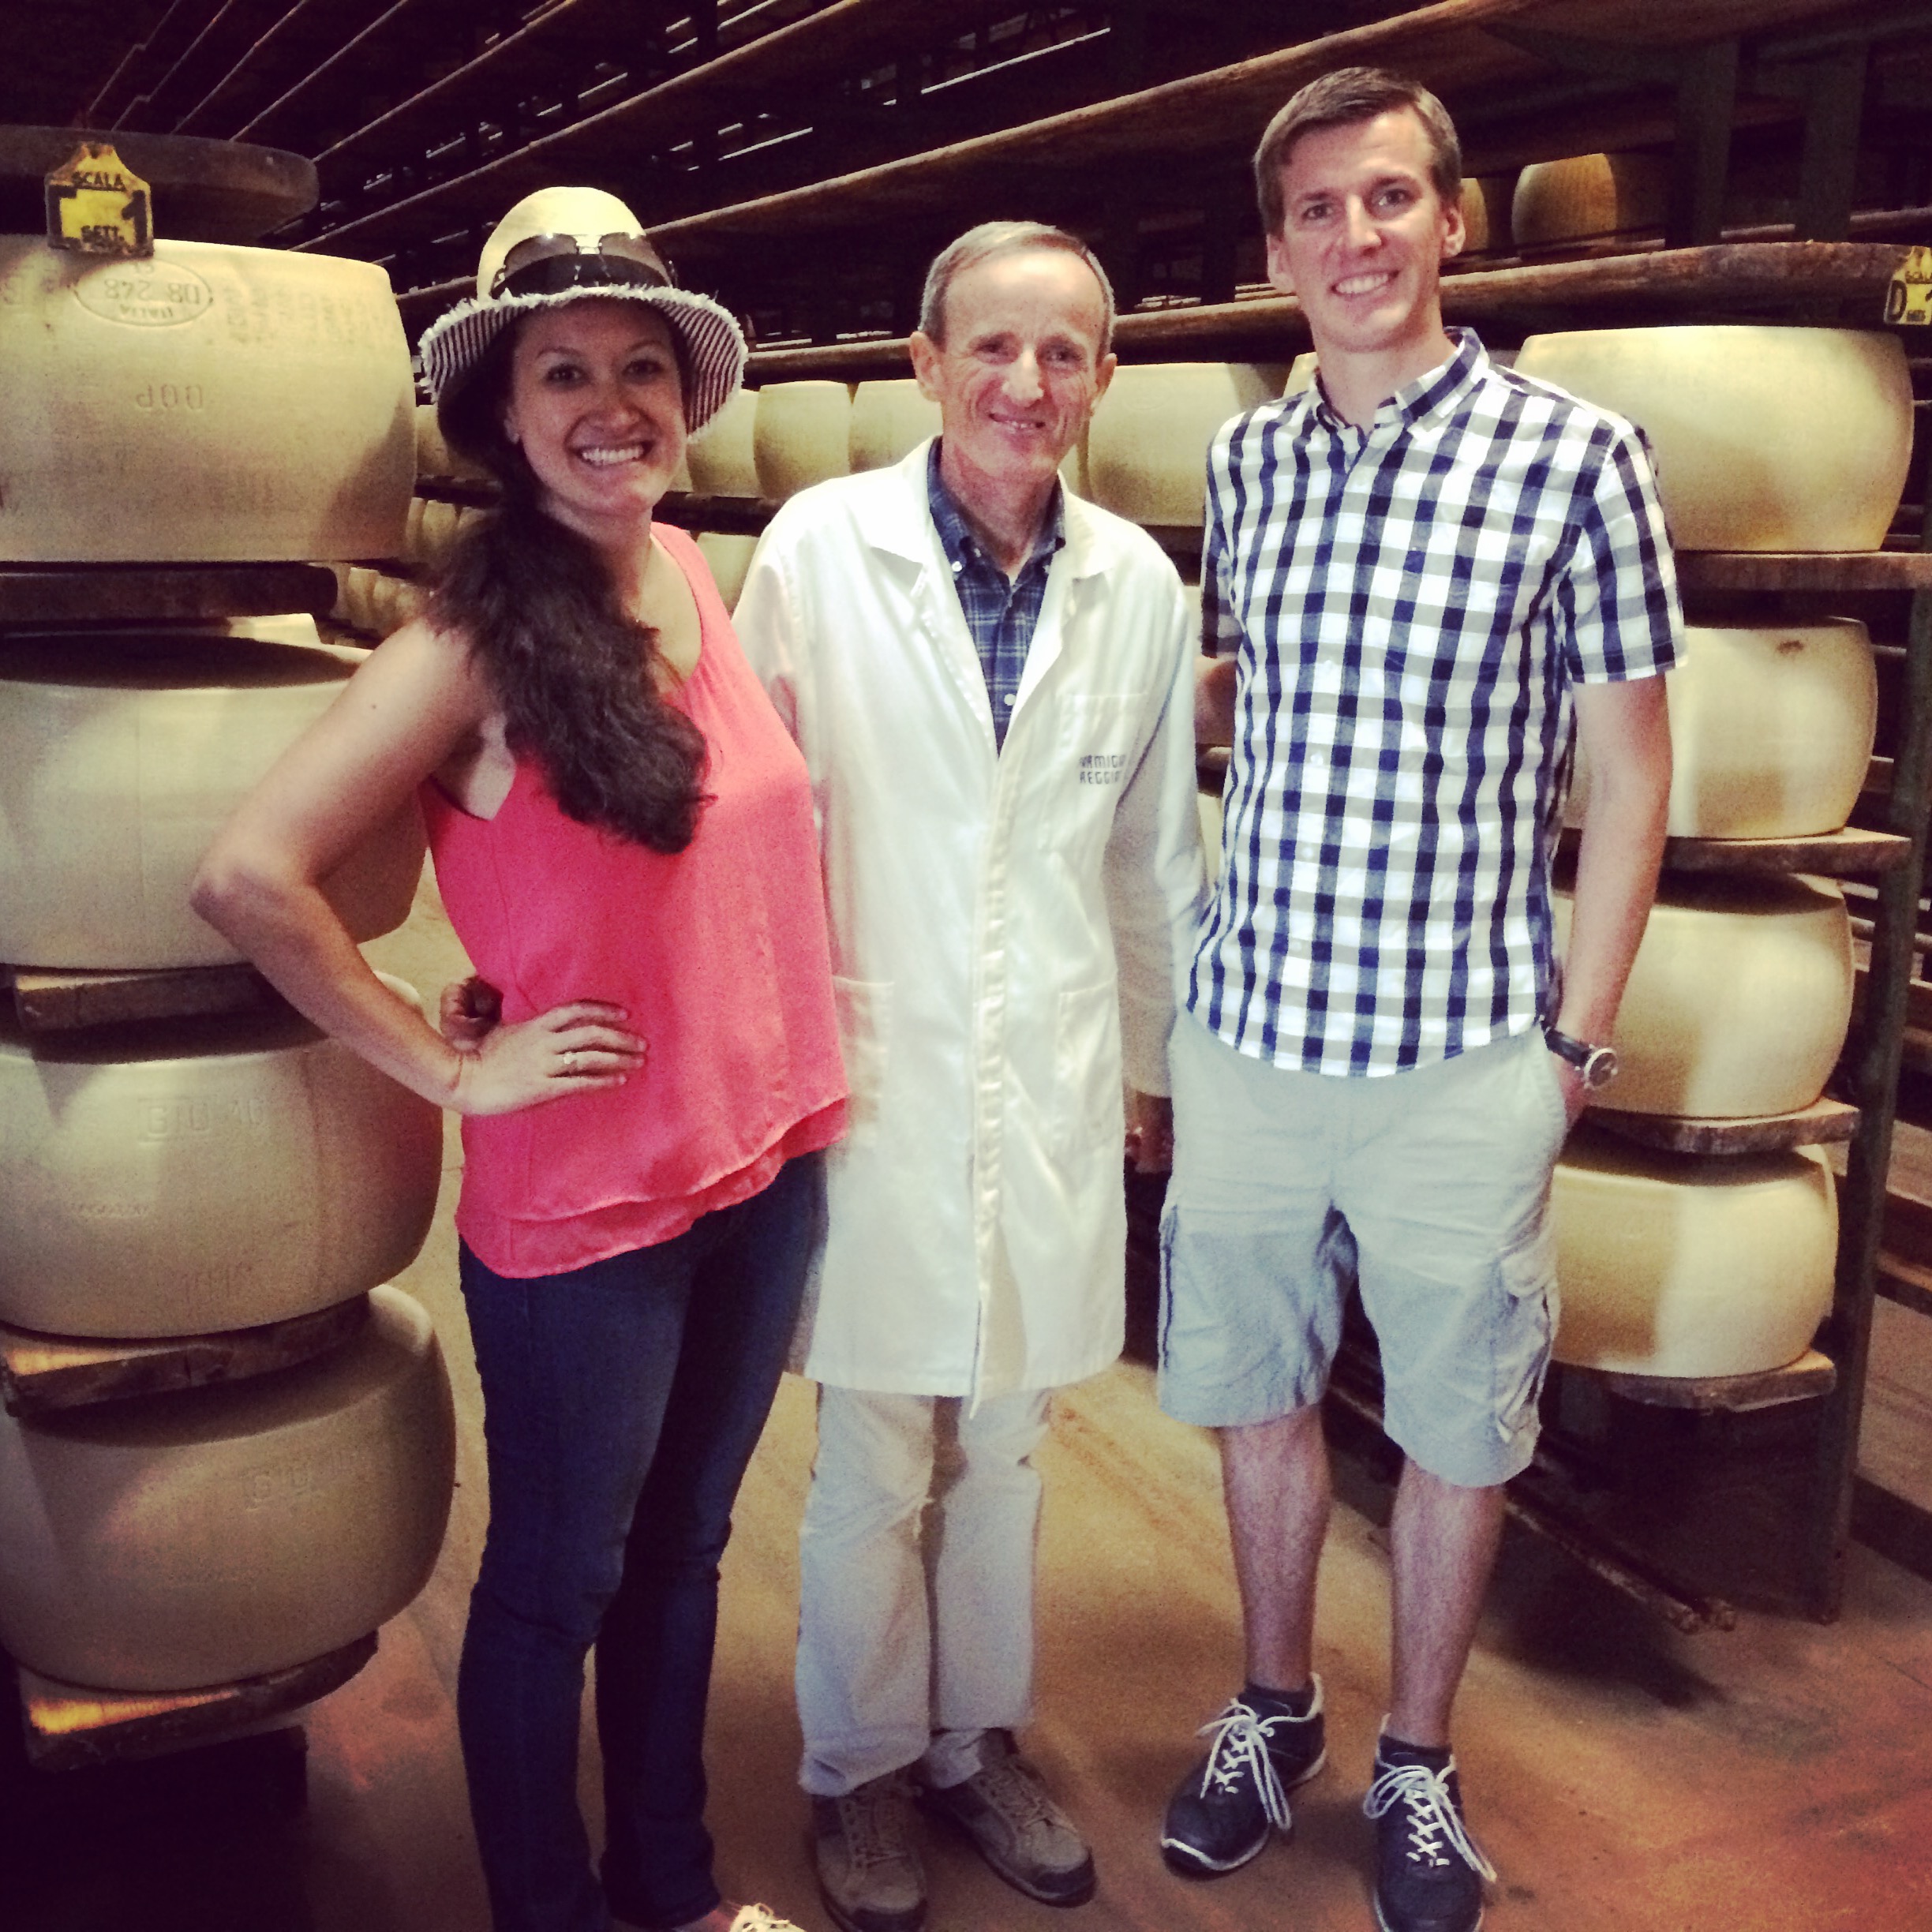 Parmigiano Reggiano Modena food tour is an experience you cannot miss!